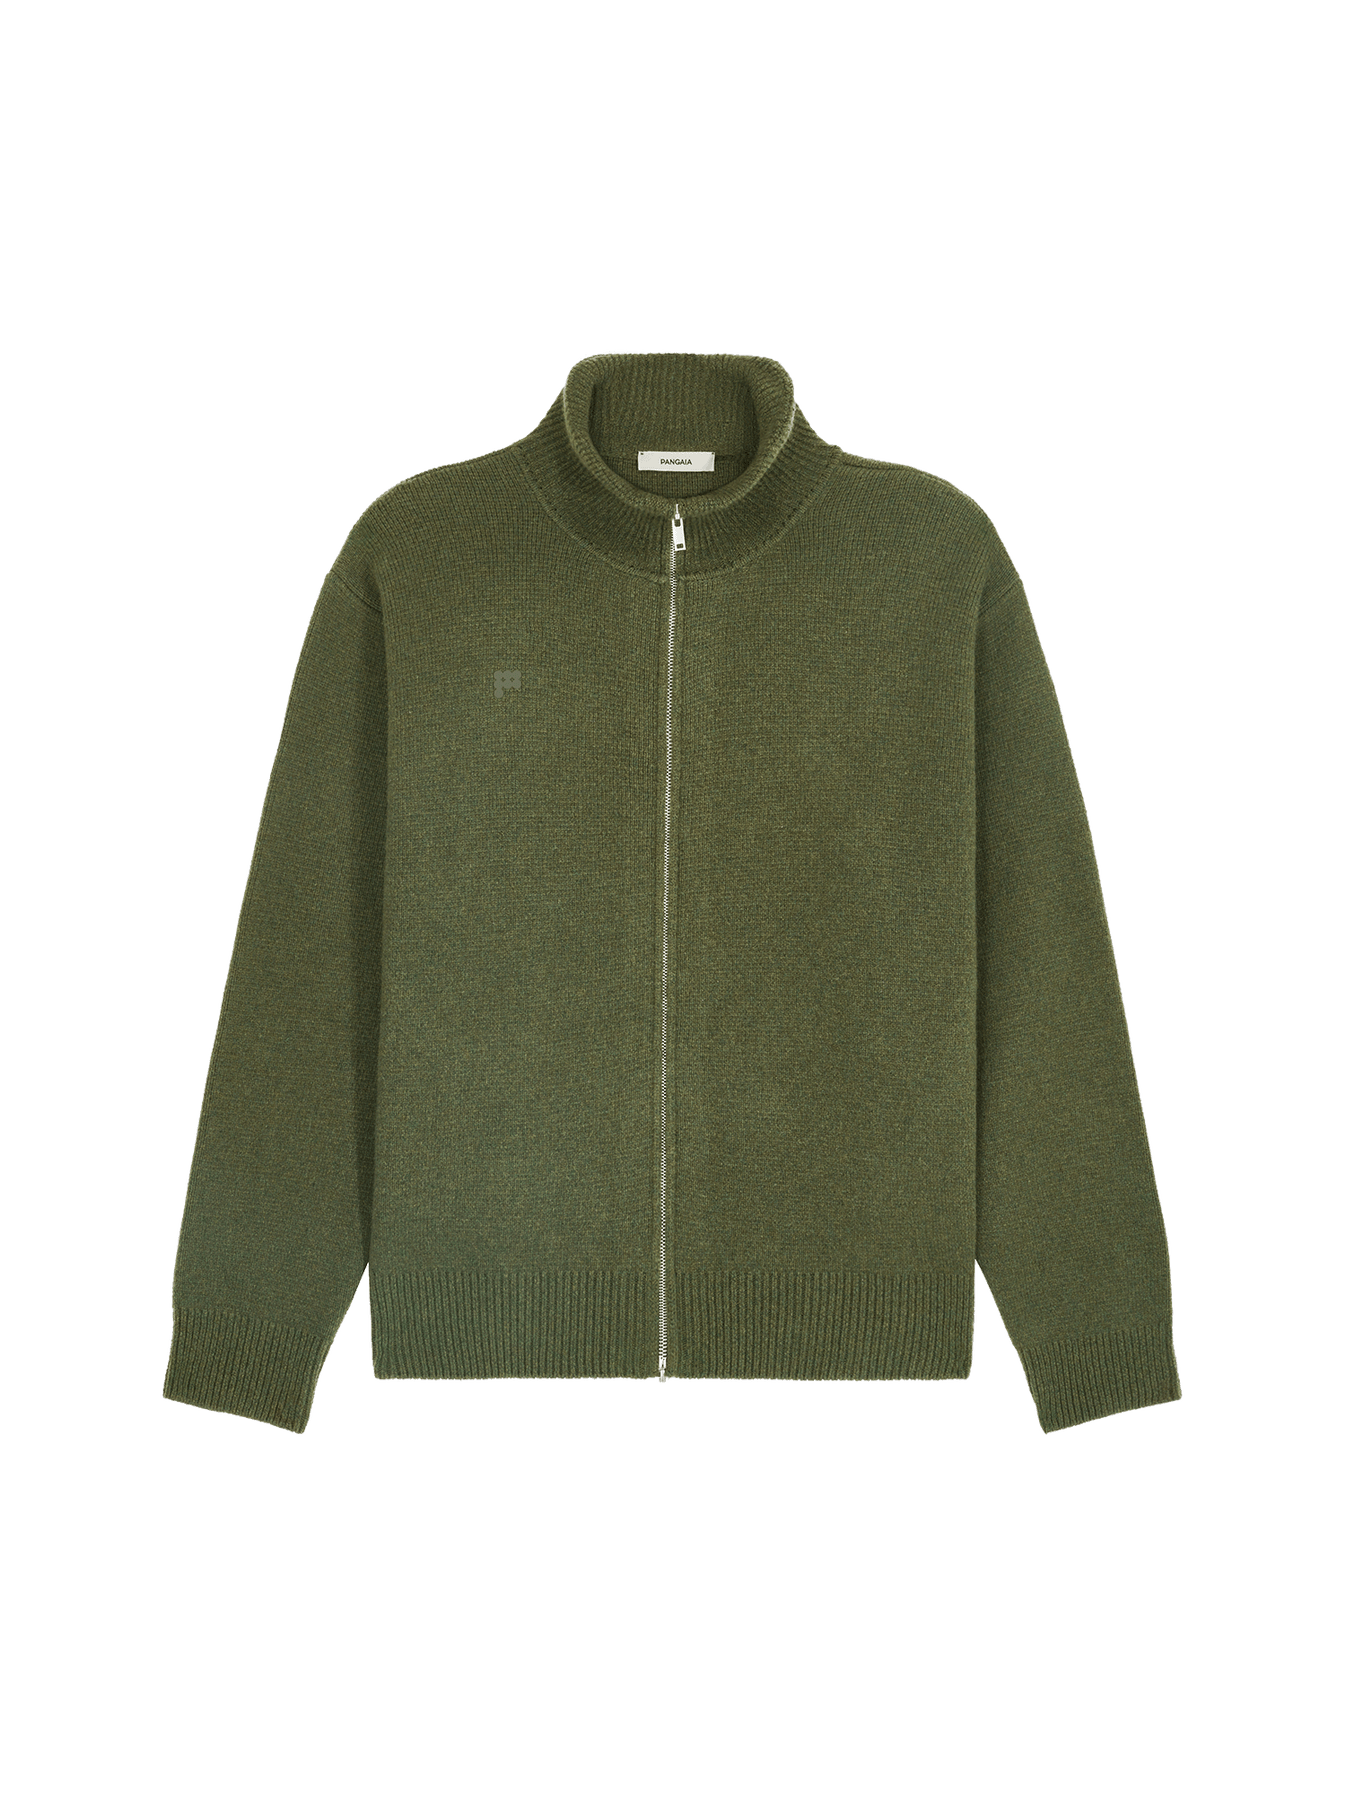 Men's Recycled Cashmere Zip Up Sweater - Rosemary Green - Pangaia